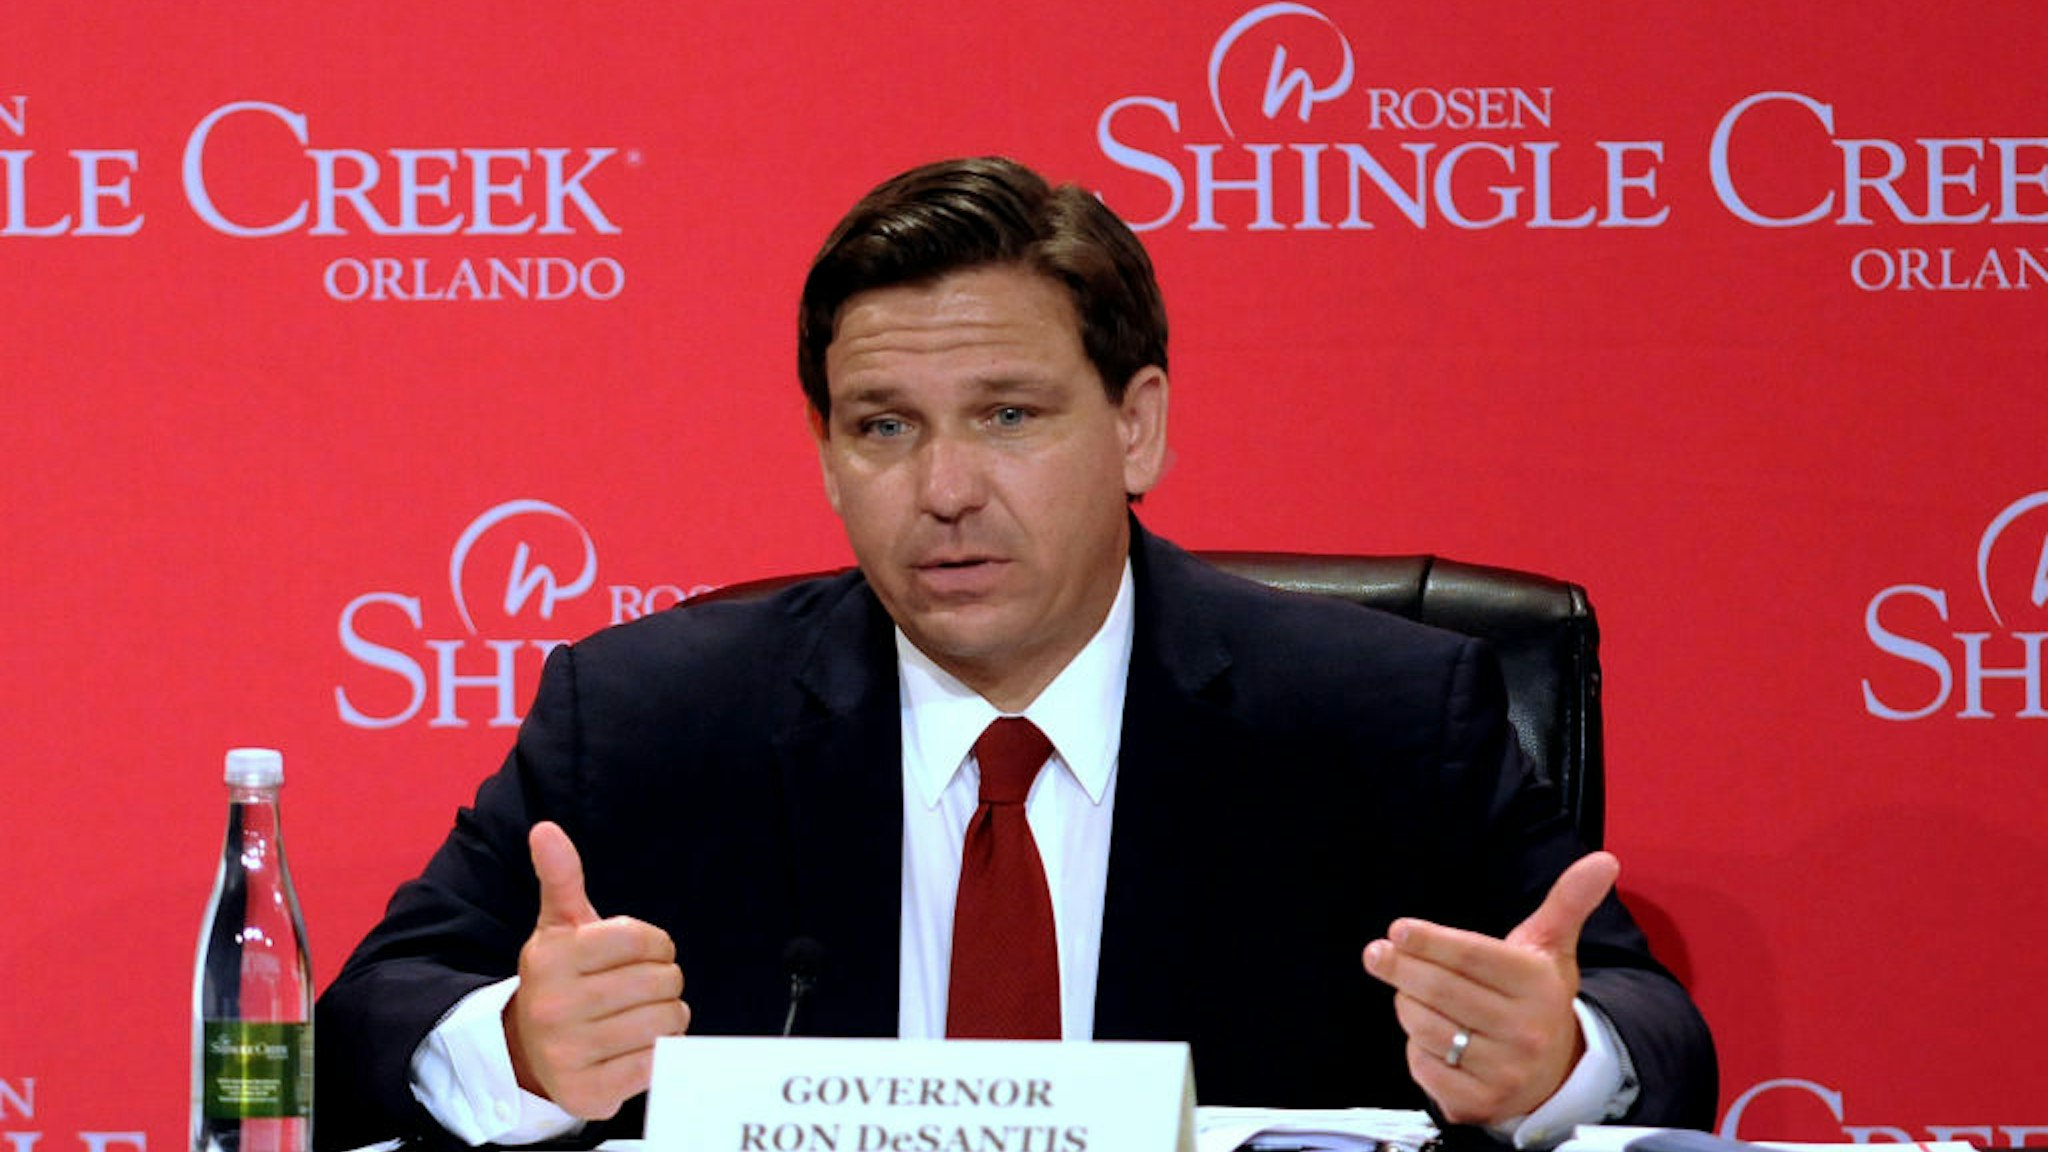 Florida Gov. Ron DeSantis participates in a roundtable discussion with U.S. Vice President Mike Pence and hospitality and tourism industry leaders to discuss Florida's phased economic reopening during the coronavirus pandemic.